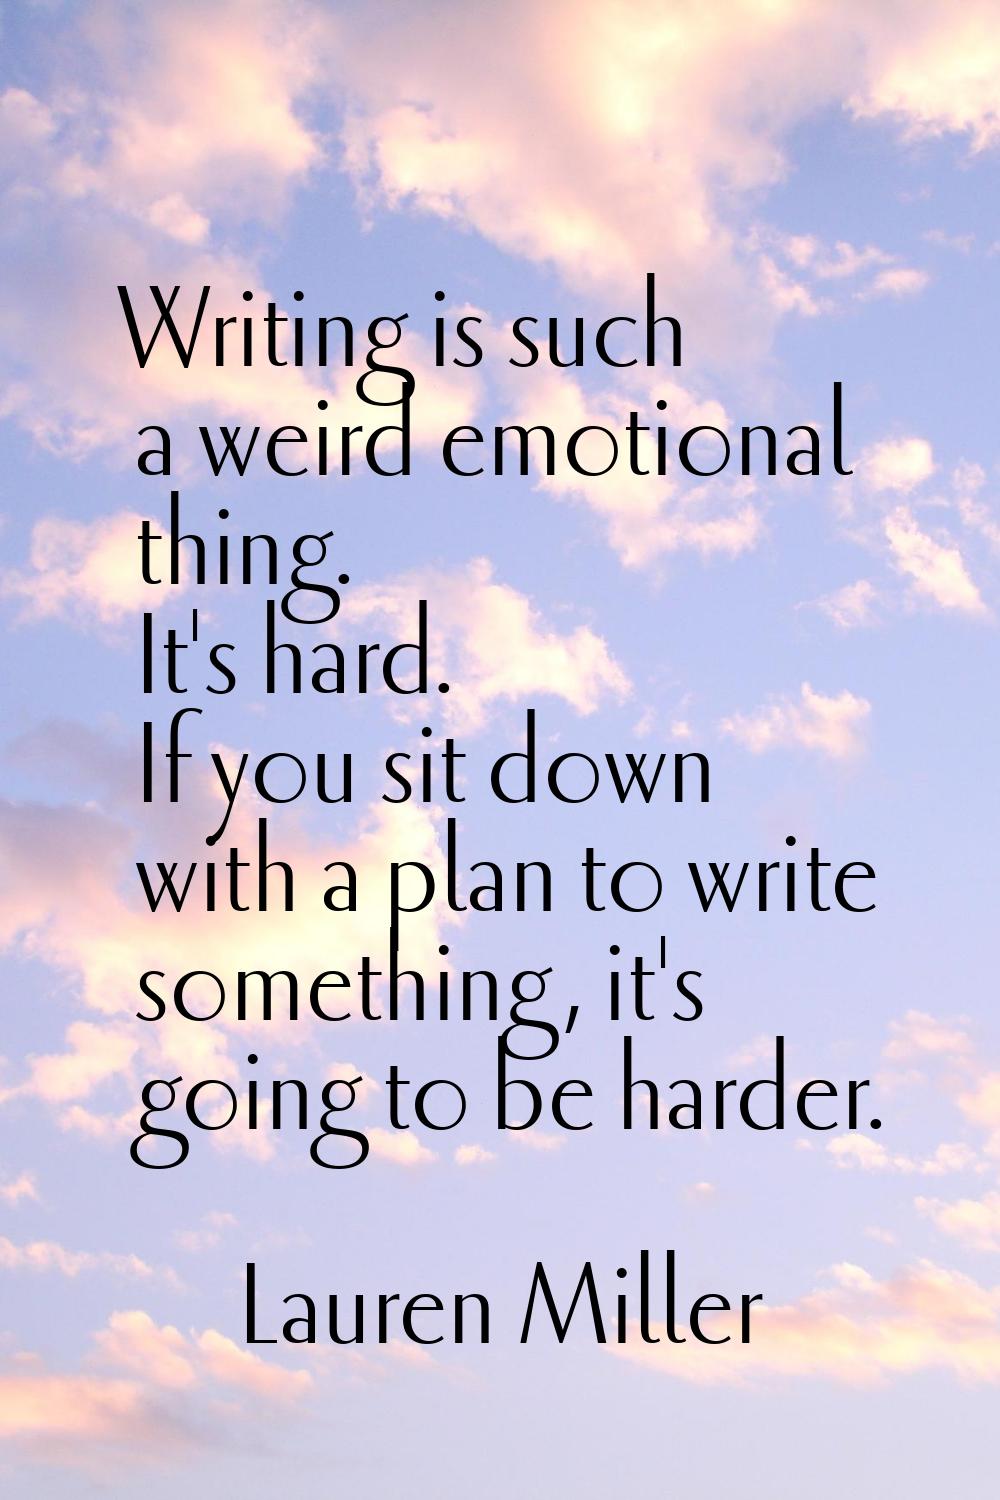 Writing is such a weird emotional thing. It's hard. If you sit down with a plan to write something,